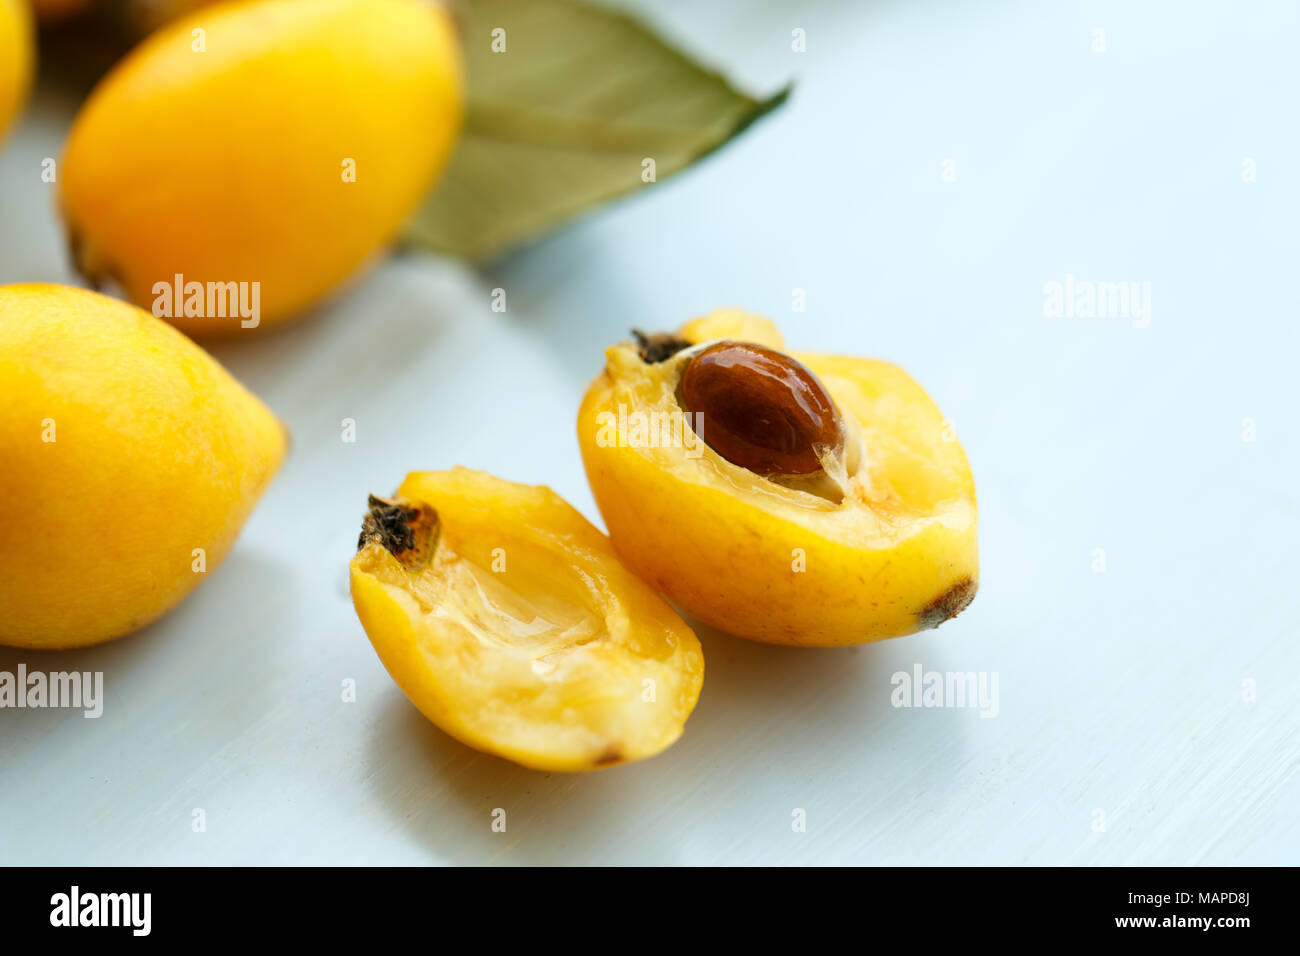 Loquat orange fruits on branch with leaves on a blue wooden background Stock Photo